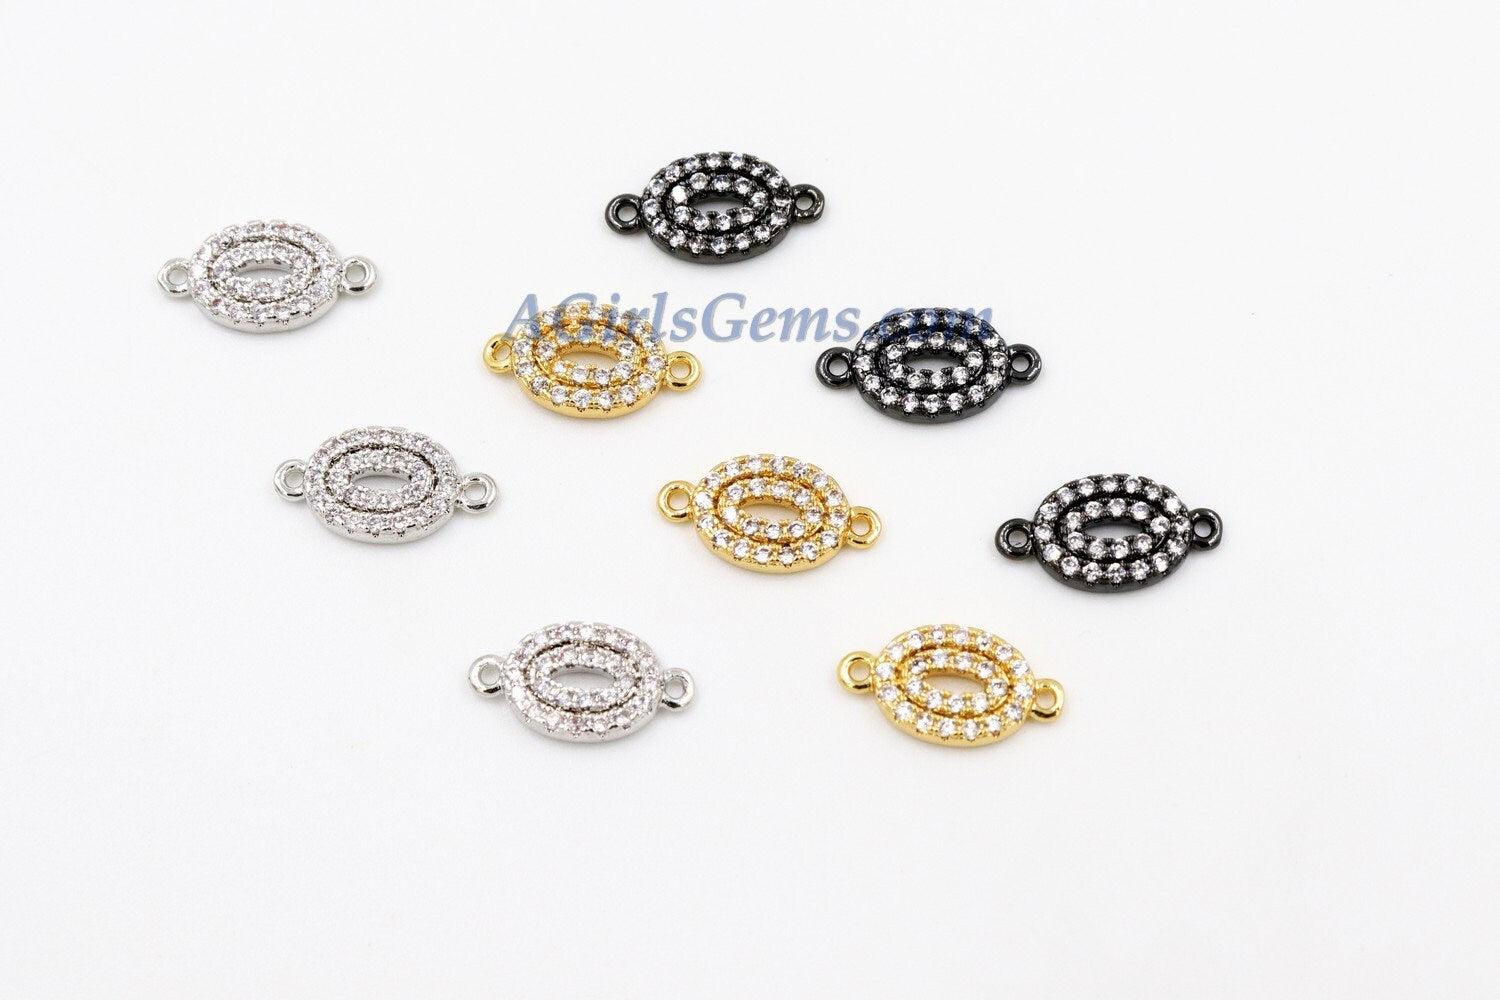 Oval Charms Connectors, 2 Pcs/Silver Rhodium Plated CZ Micro Pave Egg Bead Oval Bracelet Connector 7 x 13 mm, Egg Bead Necklace Charms